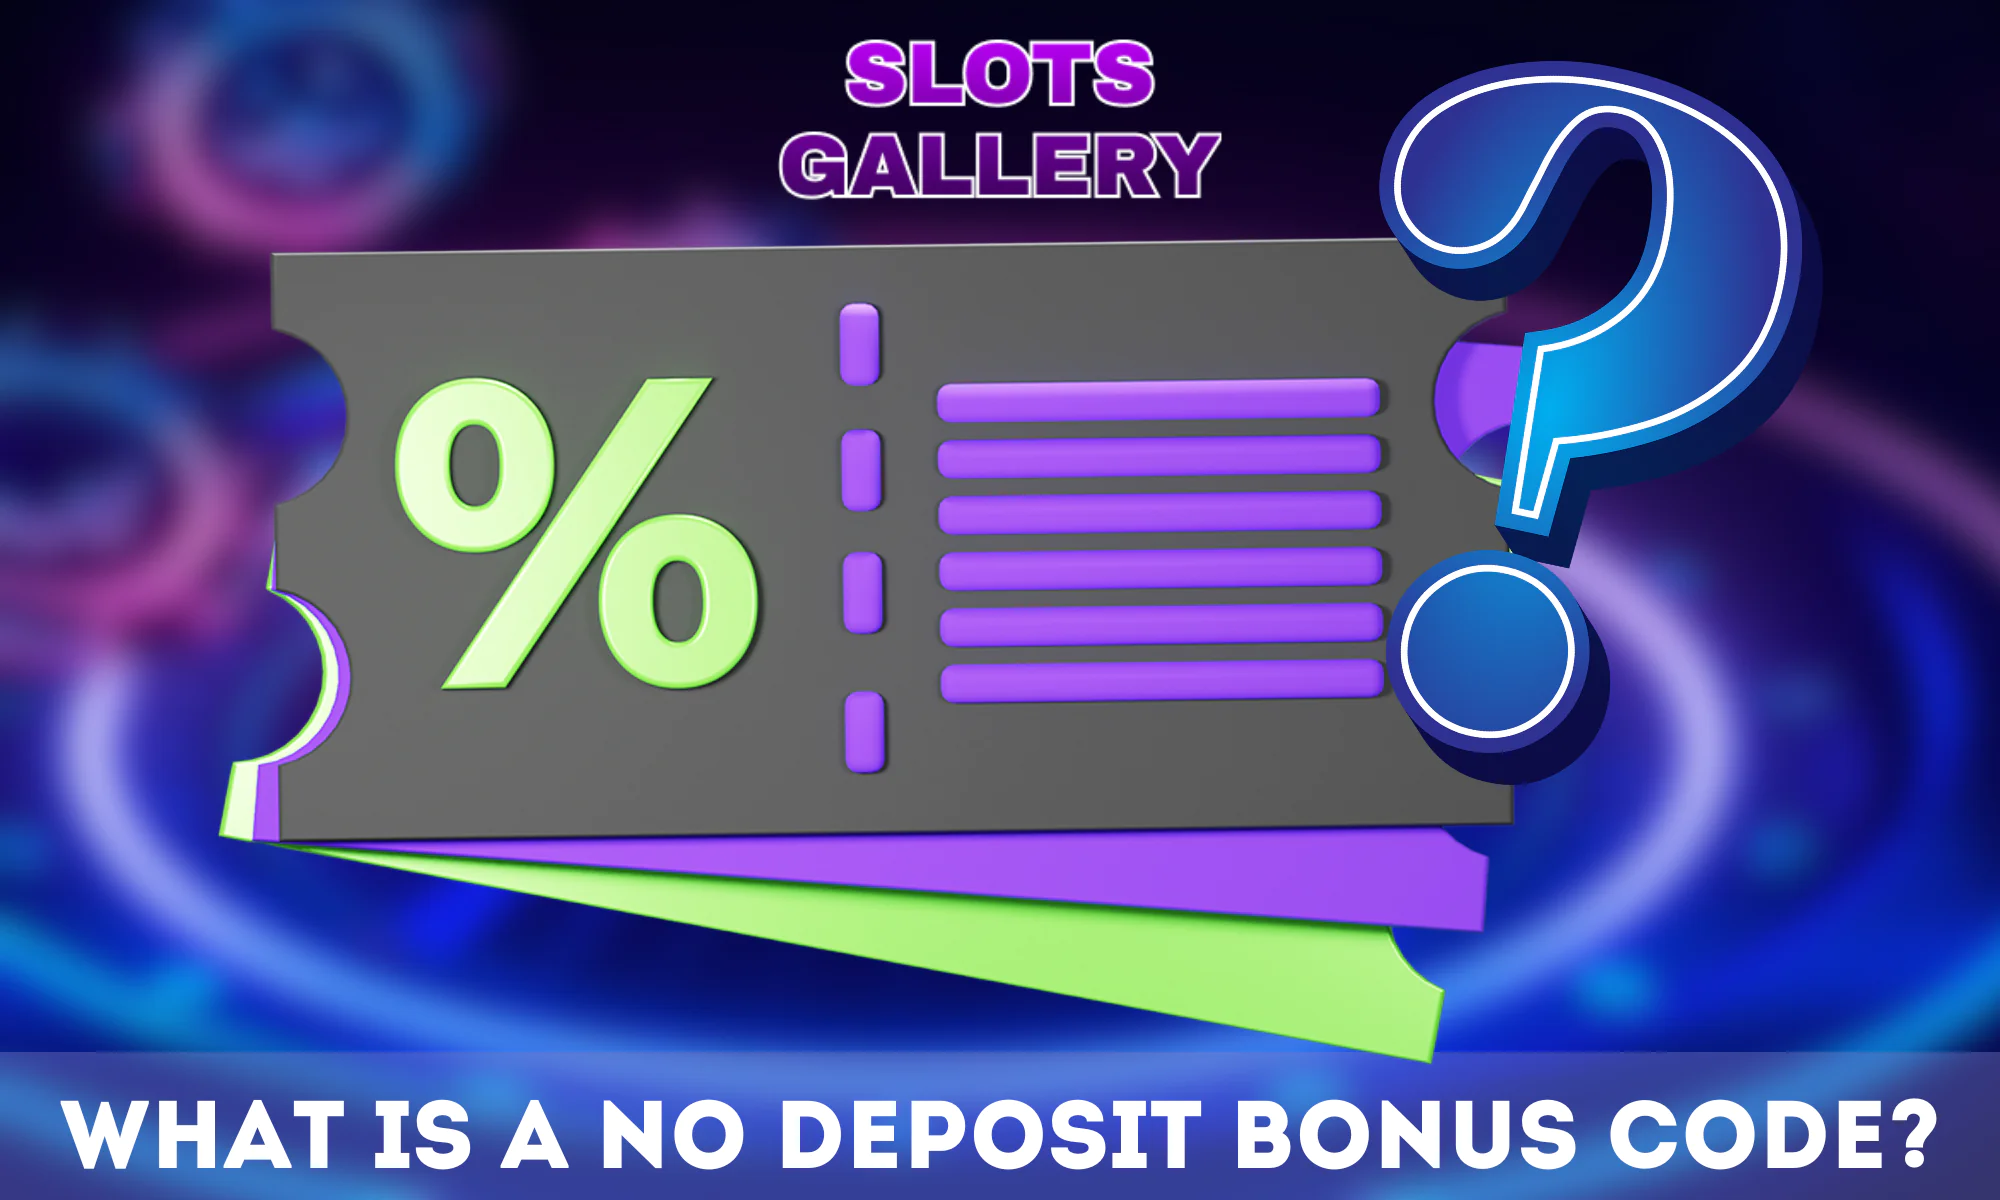 Slots Gallery has special no deposit bonuses for its players